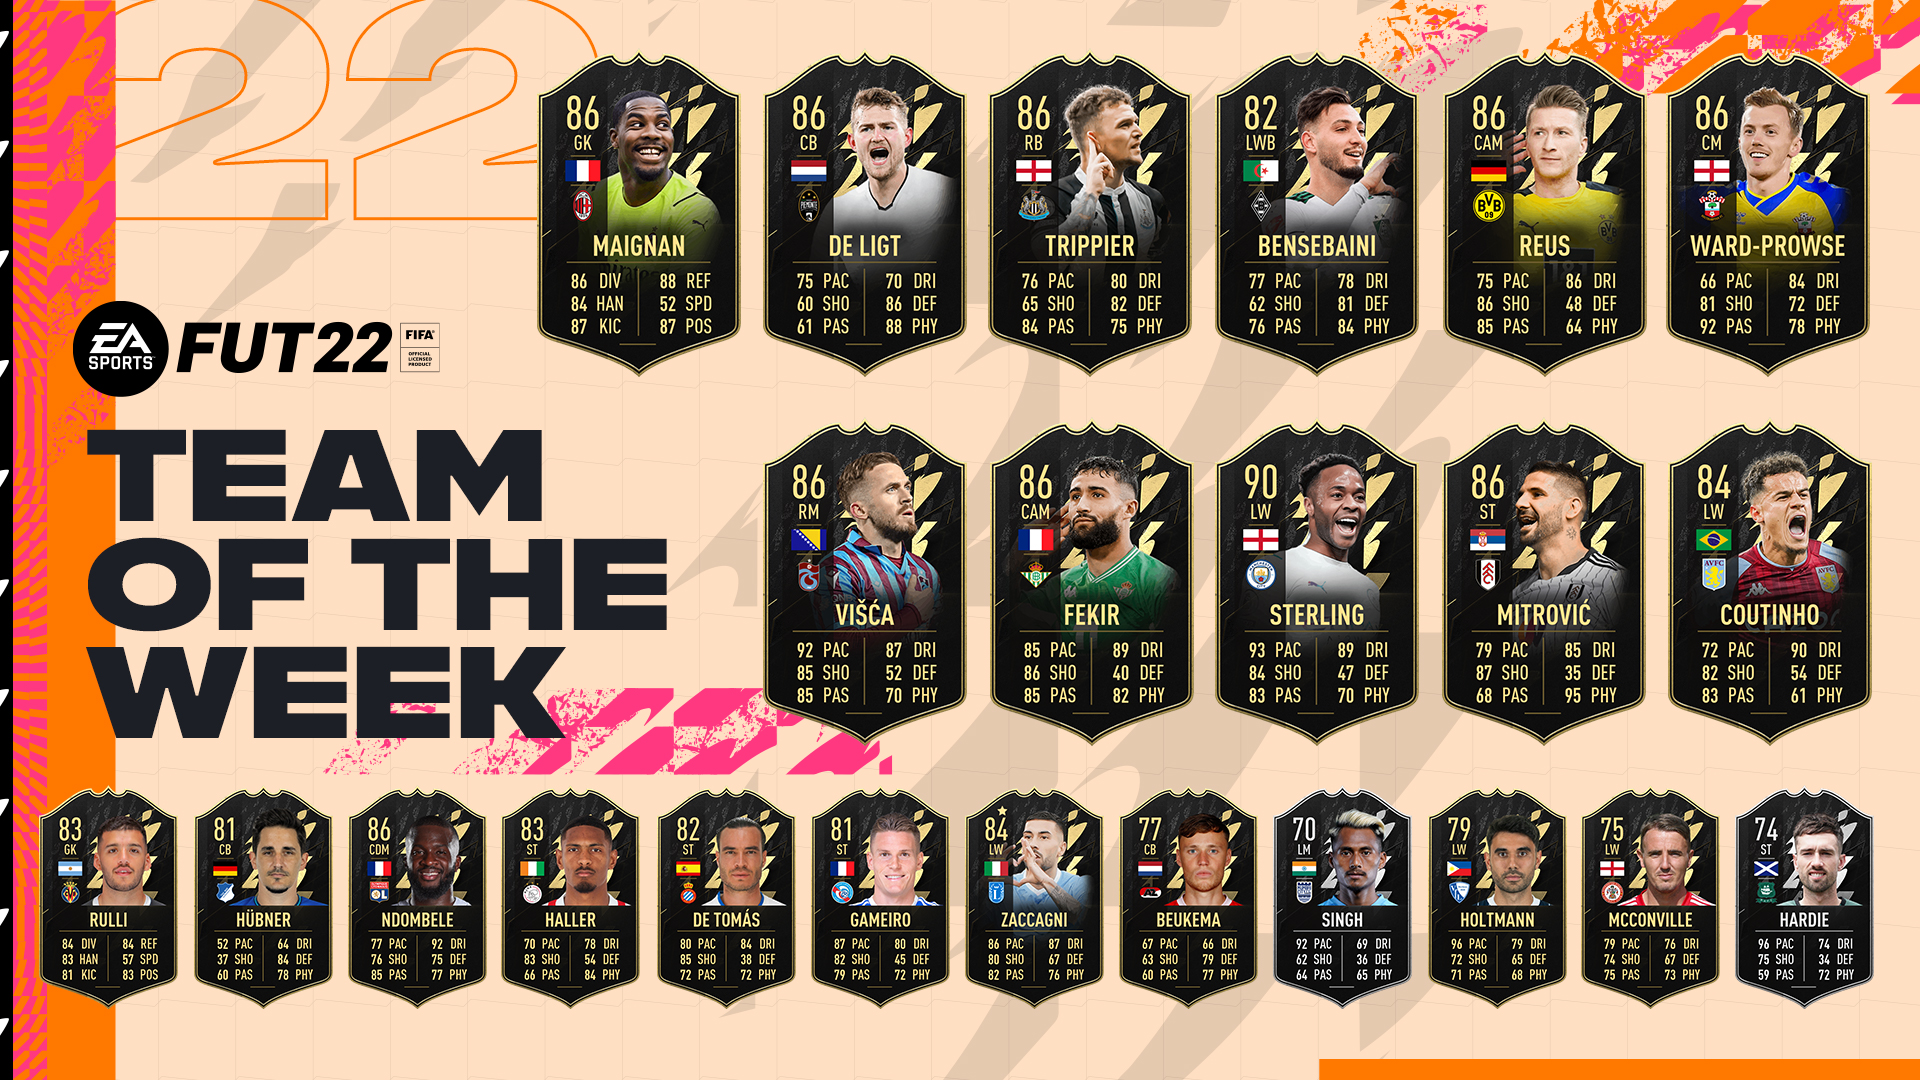 TOTW 22 is now live in FIFA 22 Ultimate Team